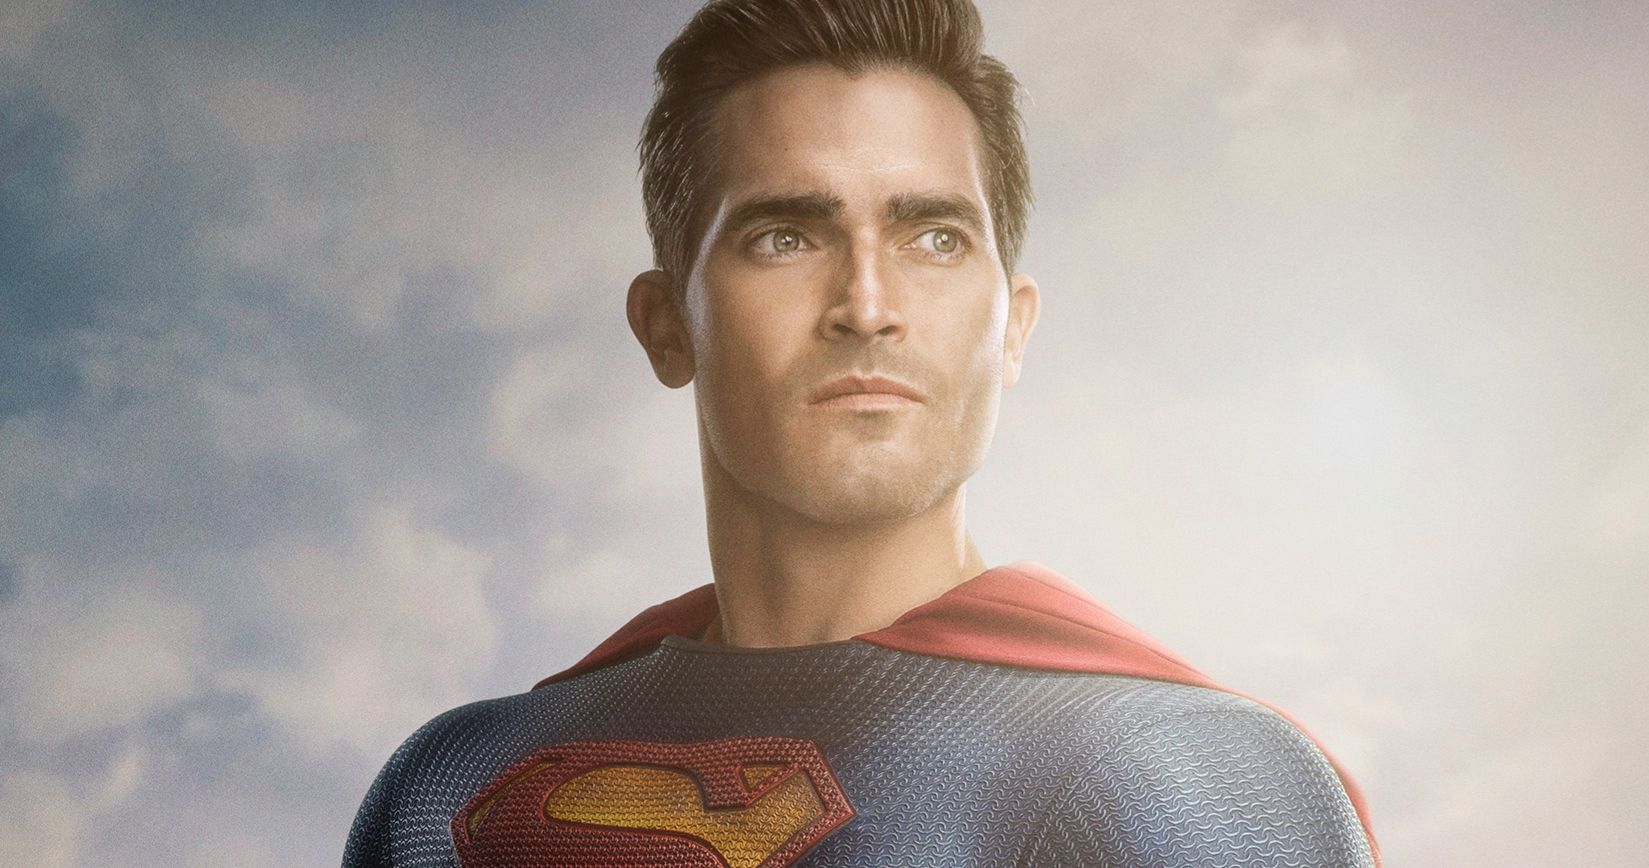 Superman &amp; Lois First Look Reveals Tyler Hoechlin in His New Super Suit